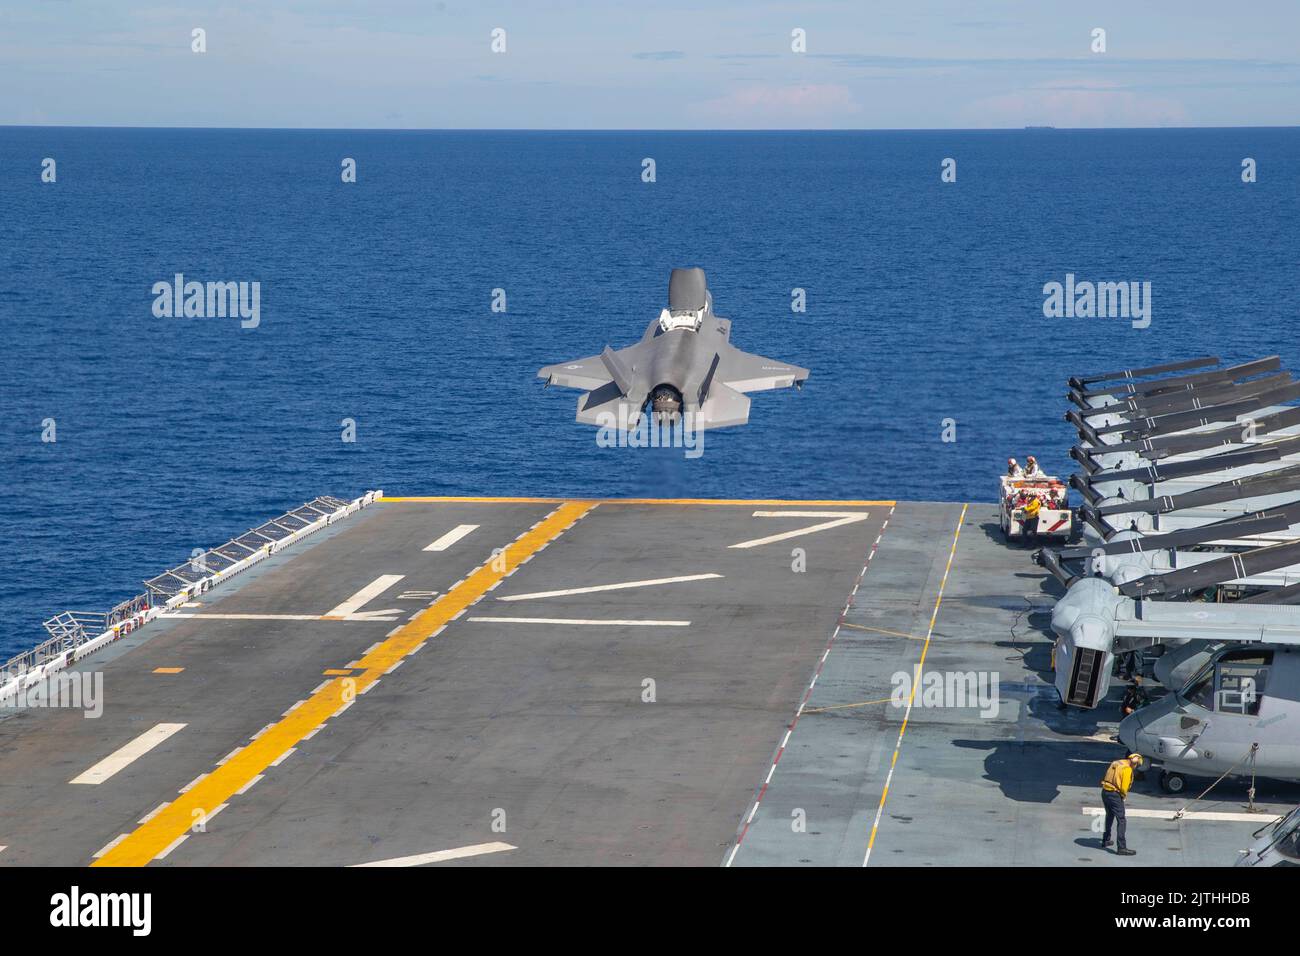 220830-N-VJ326-2106 SOUTH CHINA SEA (Aug. 30, 2022) – An F-35B Lightning II aircraft assigned to Marine Medium Tiltrotor Squadron (VMM) 262 (Reinforced) launches from amphibious assault carrier USS Tripoli (LHA 7), Aug. 30, 2022. Tripoli is operating in the U.S. 7th Fleet area of operations to enhance interoperability with allies and partners and serve as a ready response force to defend peace and maintain stability in the Indo-Pacific region. (U.S. Navy photo by Mass Communication Specialist 2nd Class Malcolm Kelley) Stock Photo